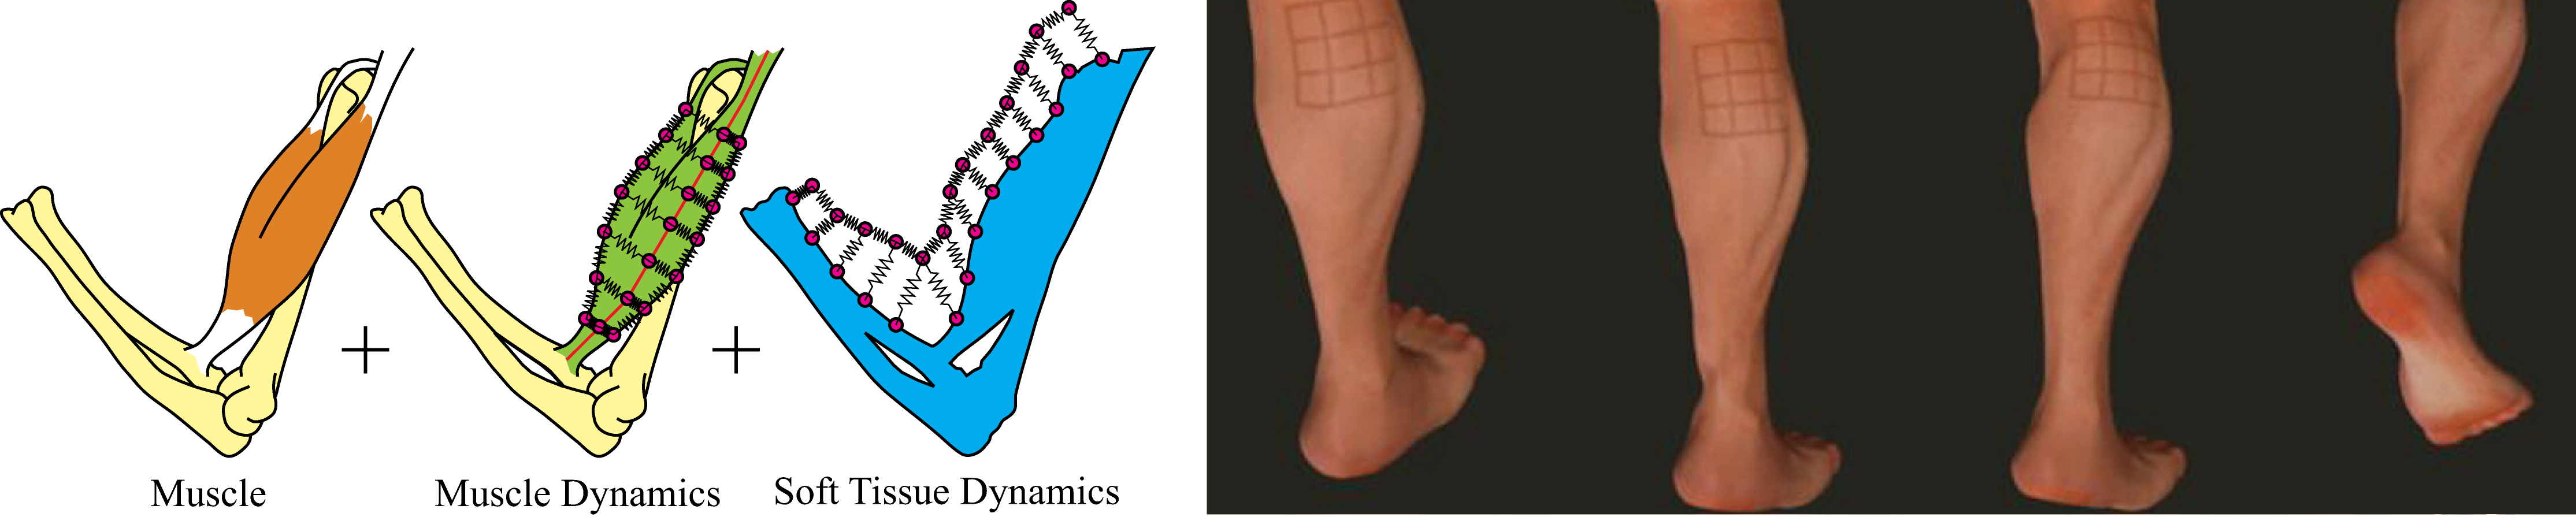 dynamic-skin-deformation-simulation-using-musculoskeletal-model-and-soft-tissue-dynamics-image